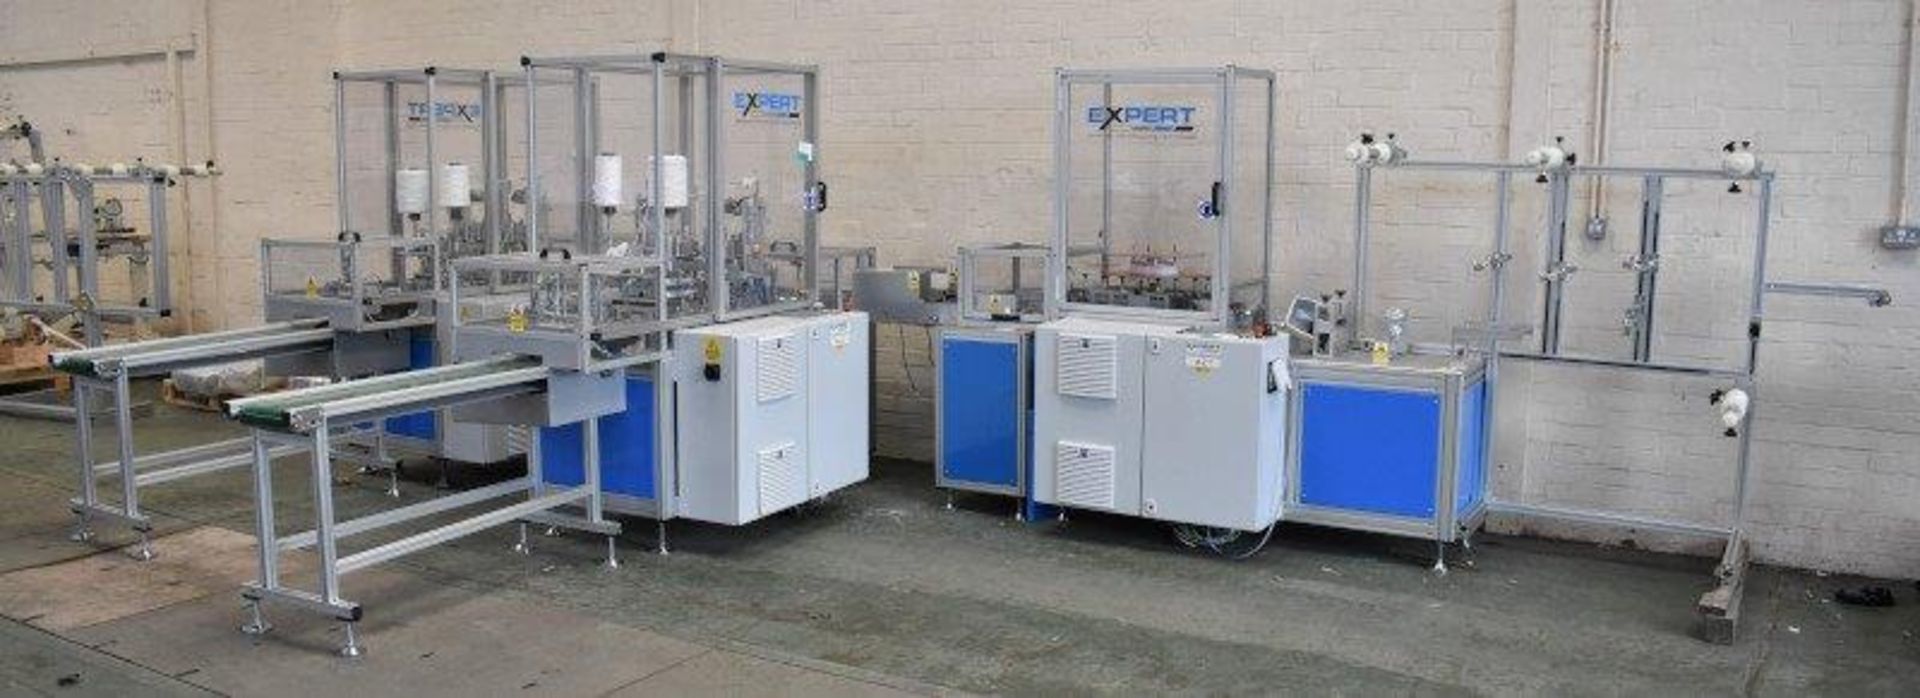 Expert fully automated Mask Making Machine - manufactured in 2020 - Image 2 of 21